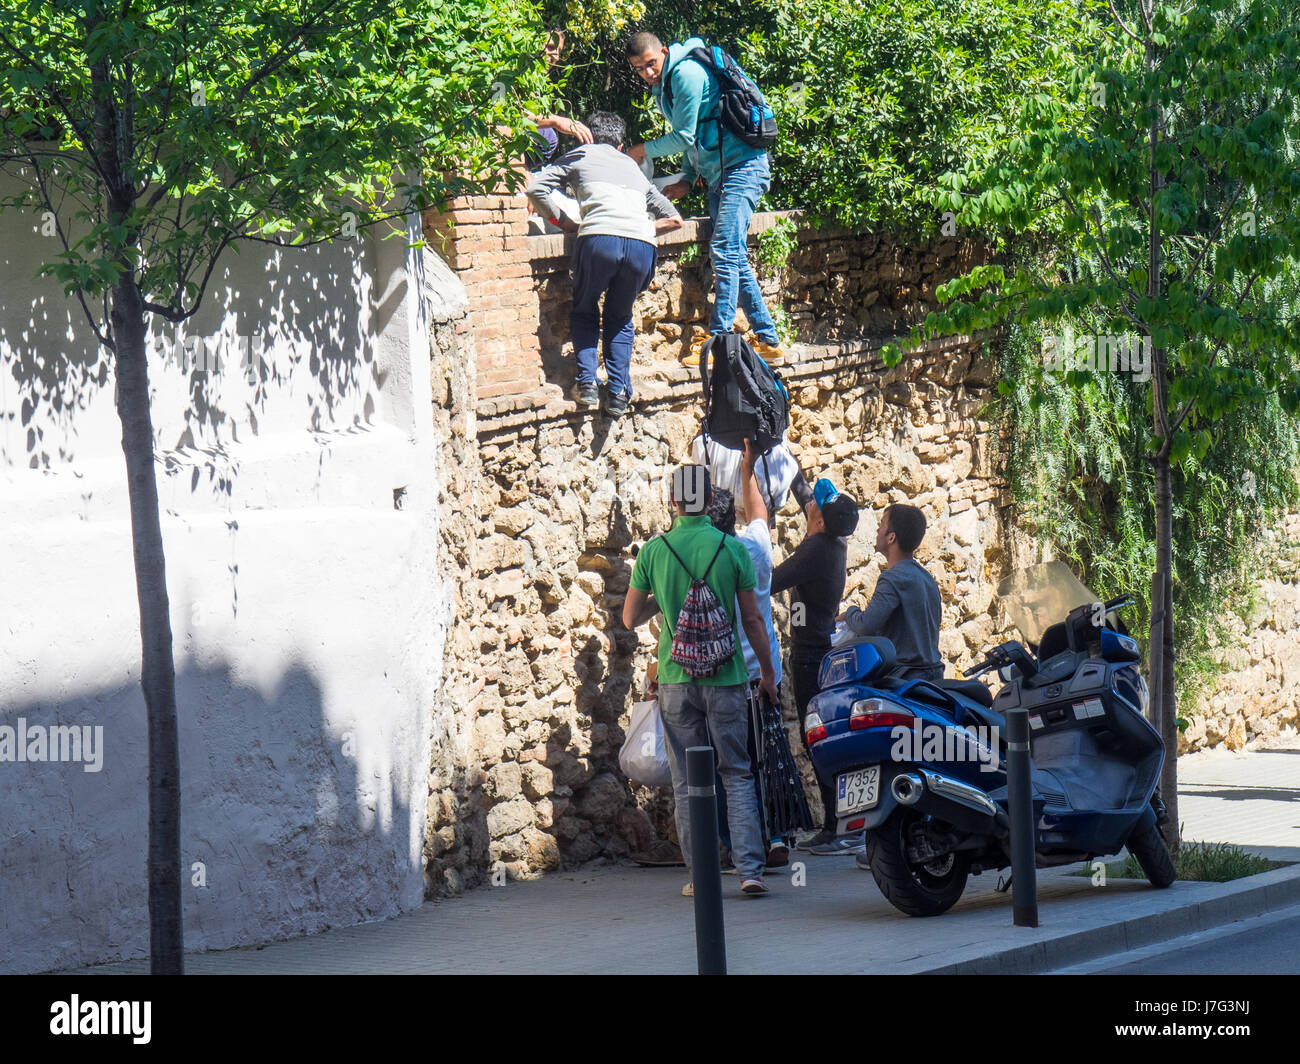 Sellers of fake goods escaping the authorities by scaling a wall. Stock Photo